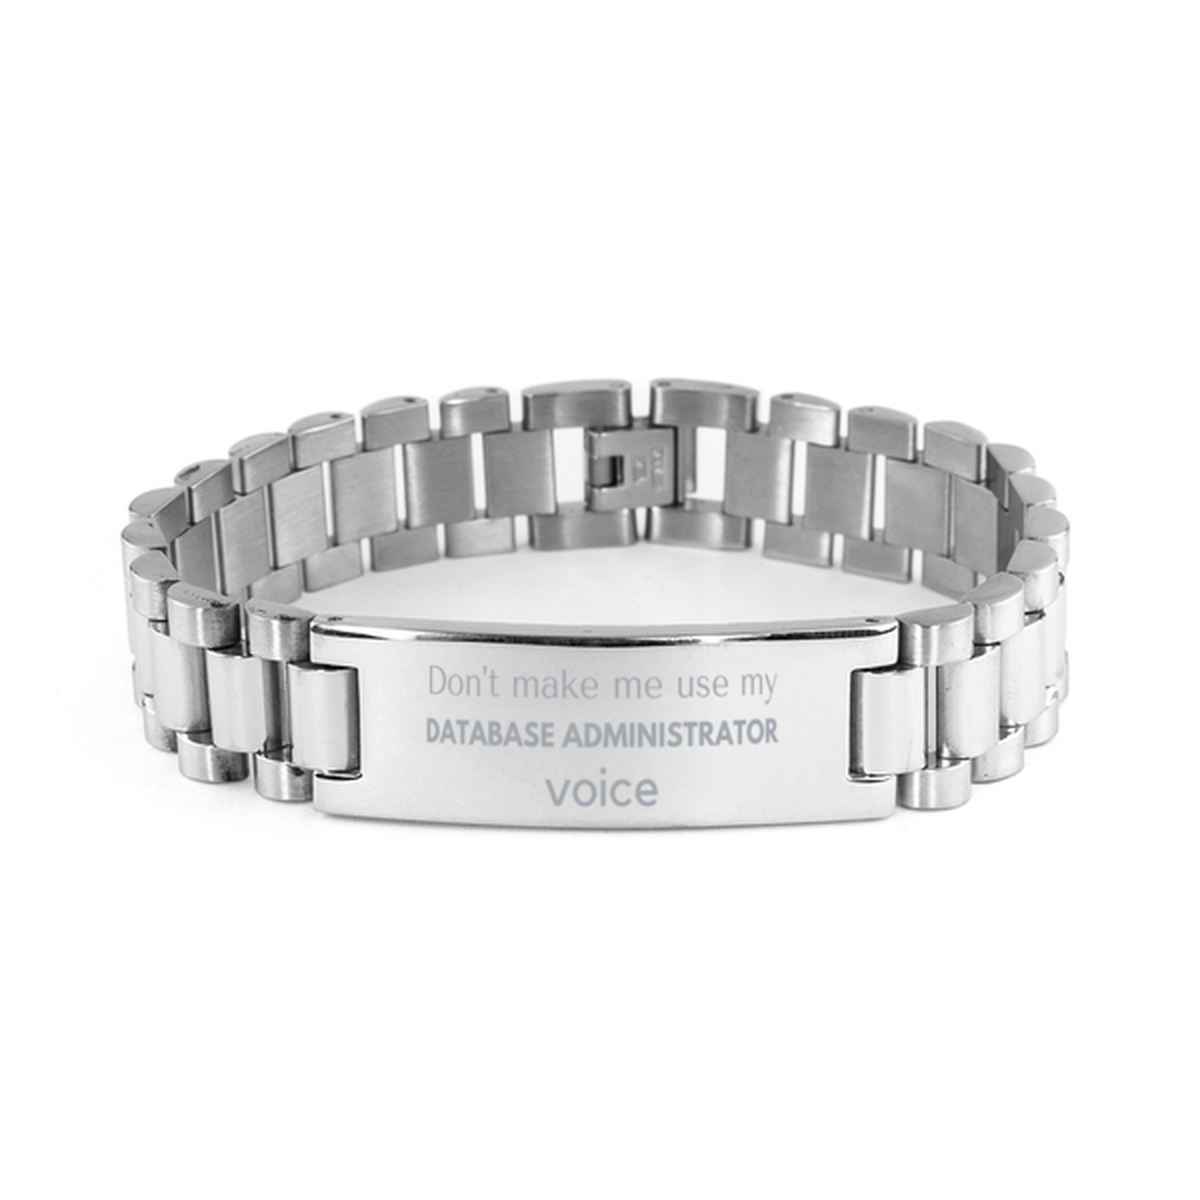 Don't make me use my Database Administrator voice, Sarcasm Database Administrator Gifts, Christmas Database Administrator Ladder Stainless Steel Bracelet Birthday Unique Gifts For Database Administrator Coworkers, Men, Women, Colleague, Friends